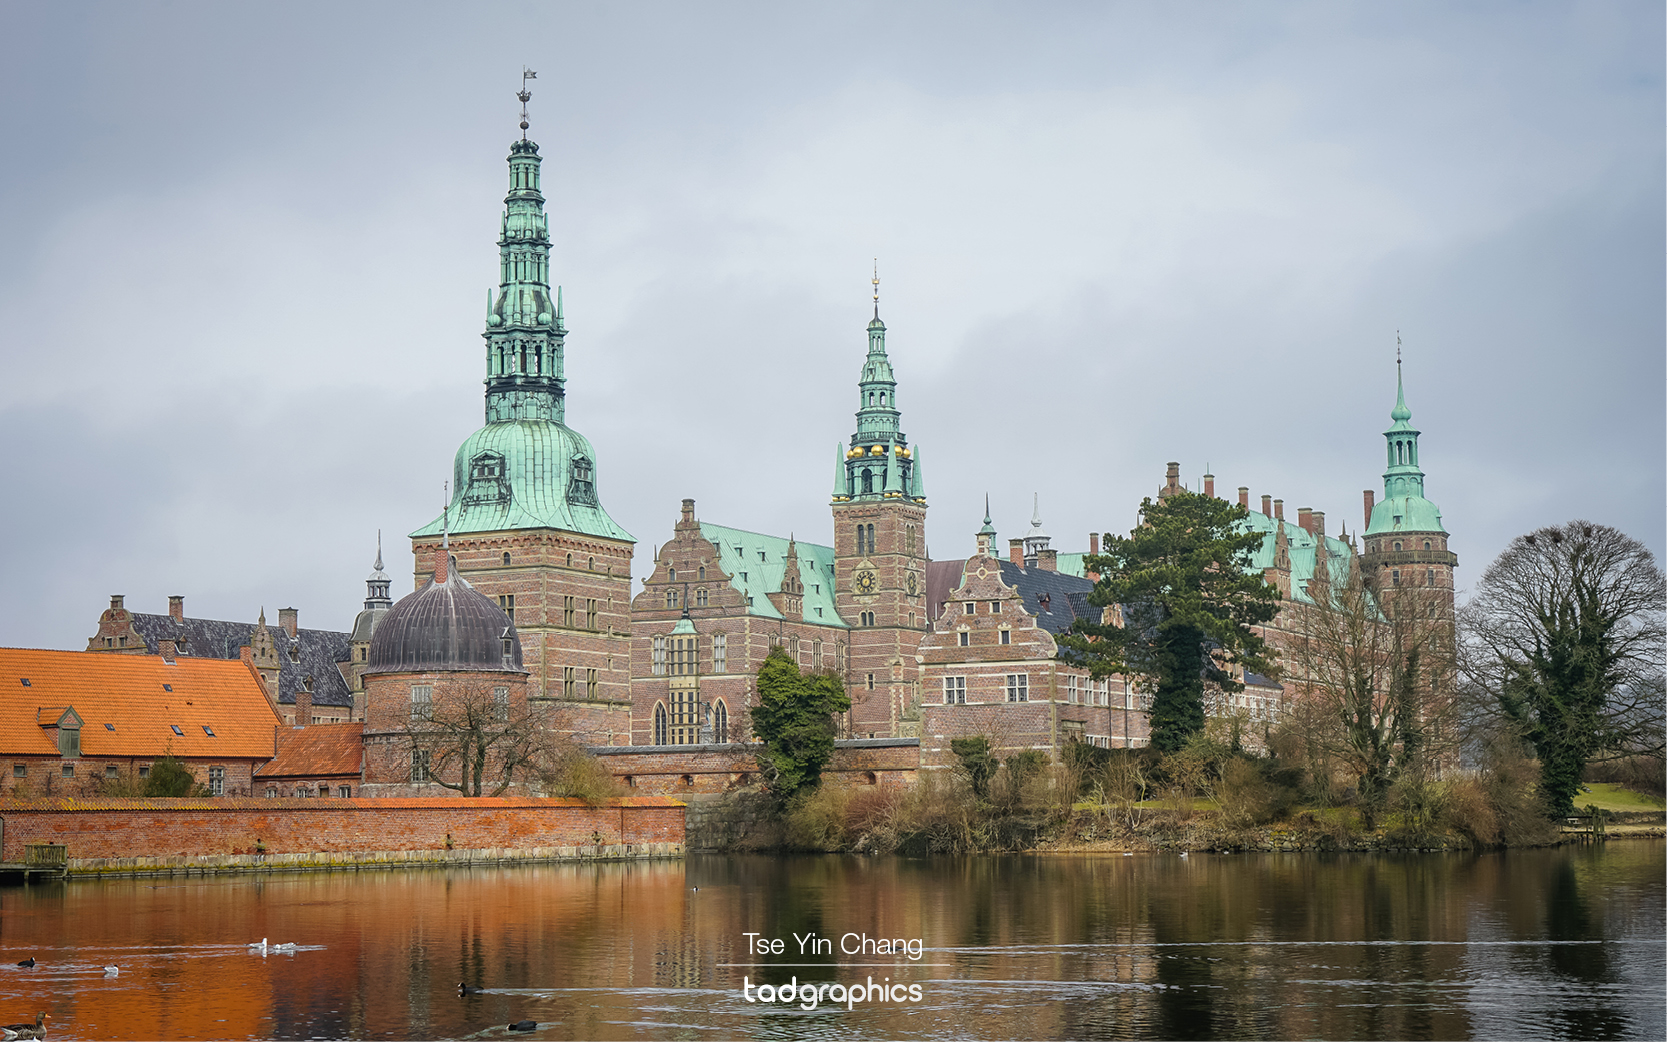 The Frederiksborg Castle built by King Christian IV in the early decades of the 17th century incorporates the best of Renaissance architecture and craftsmanship